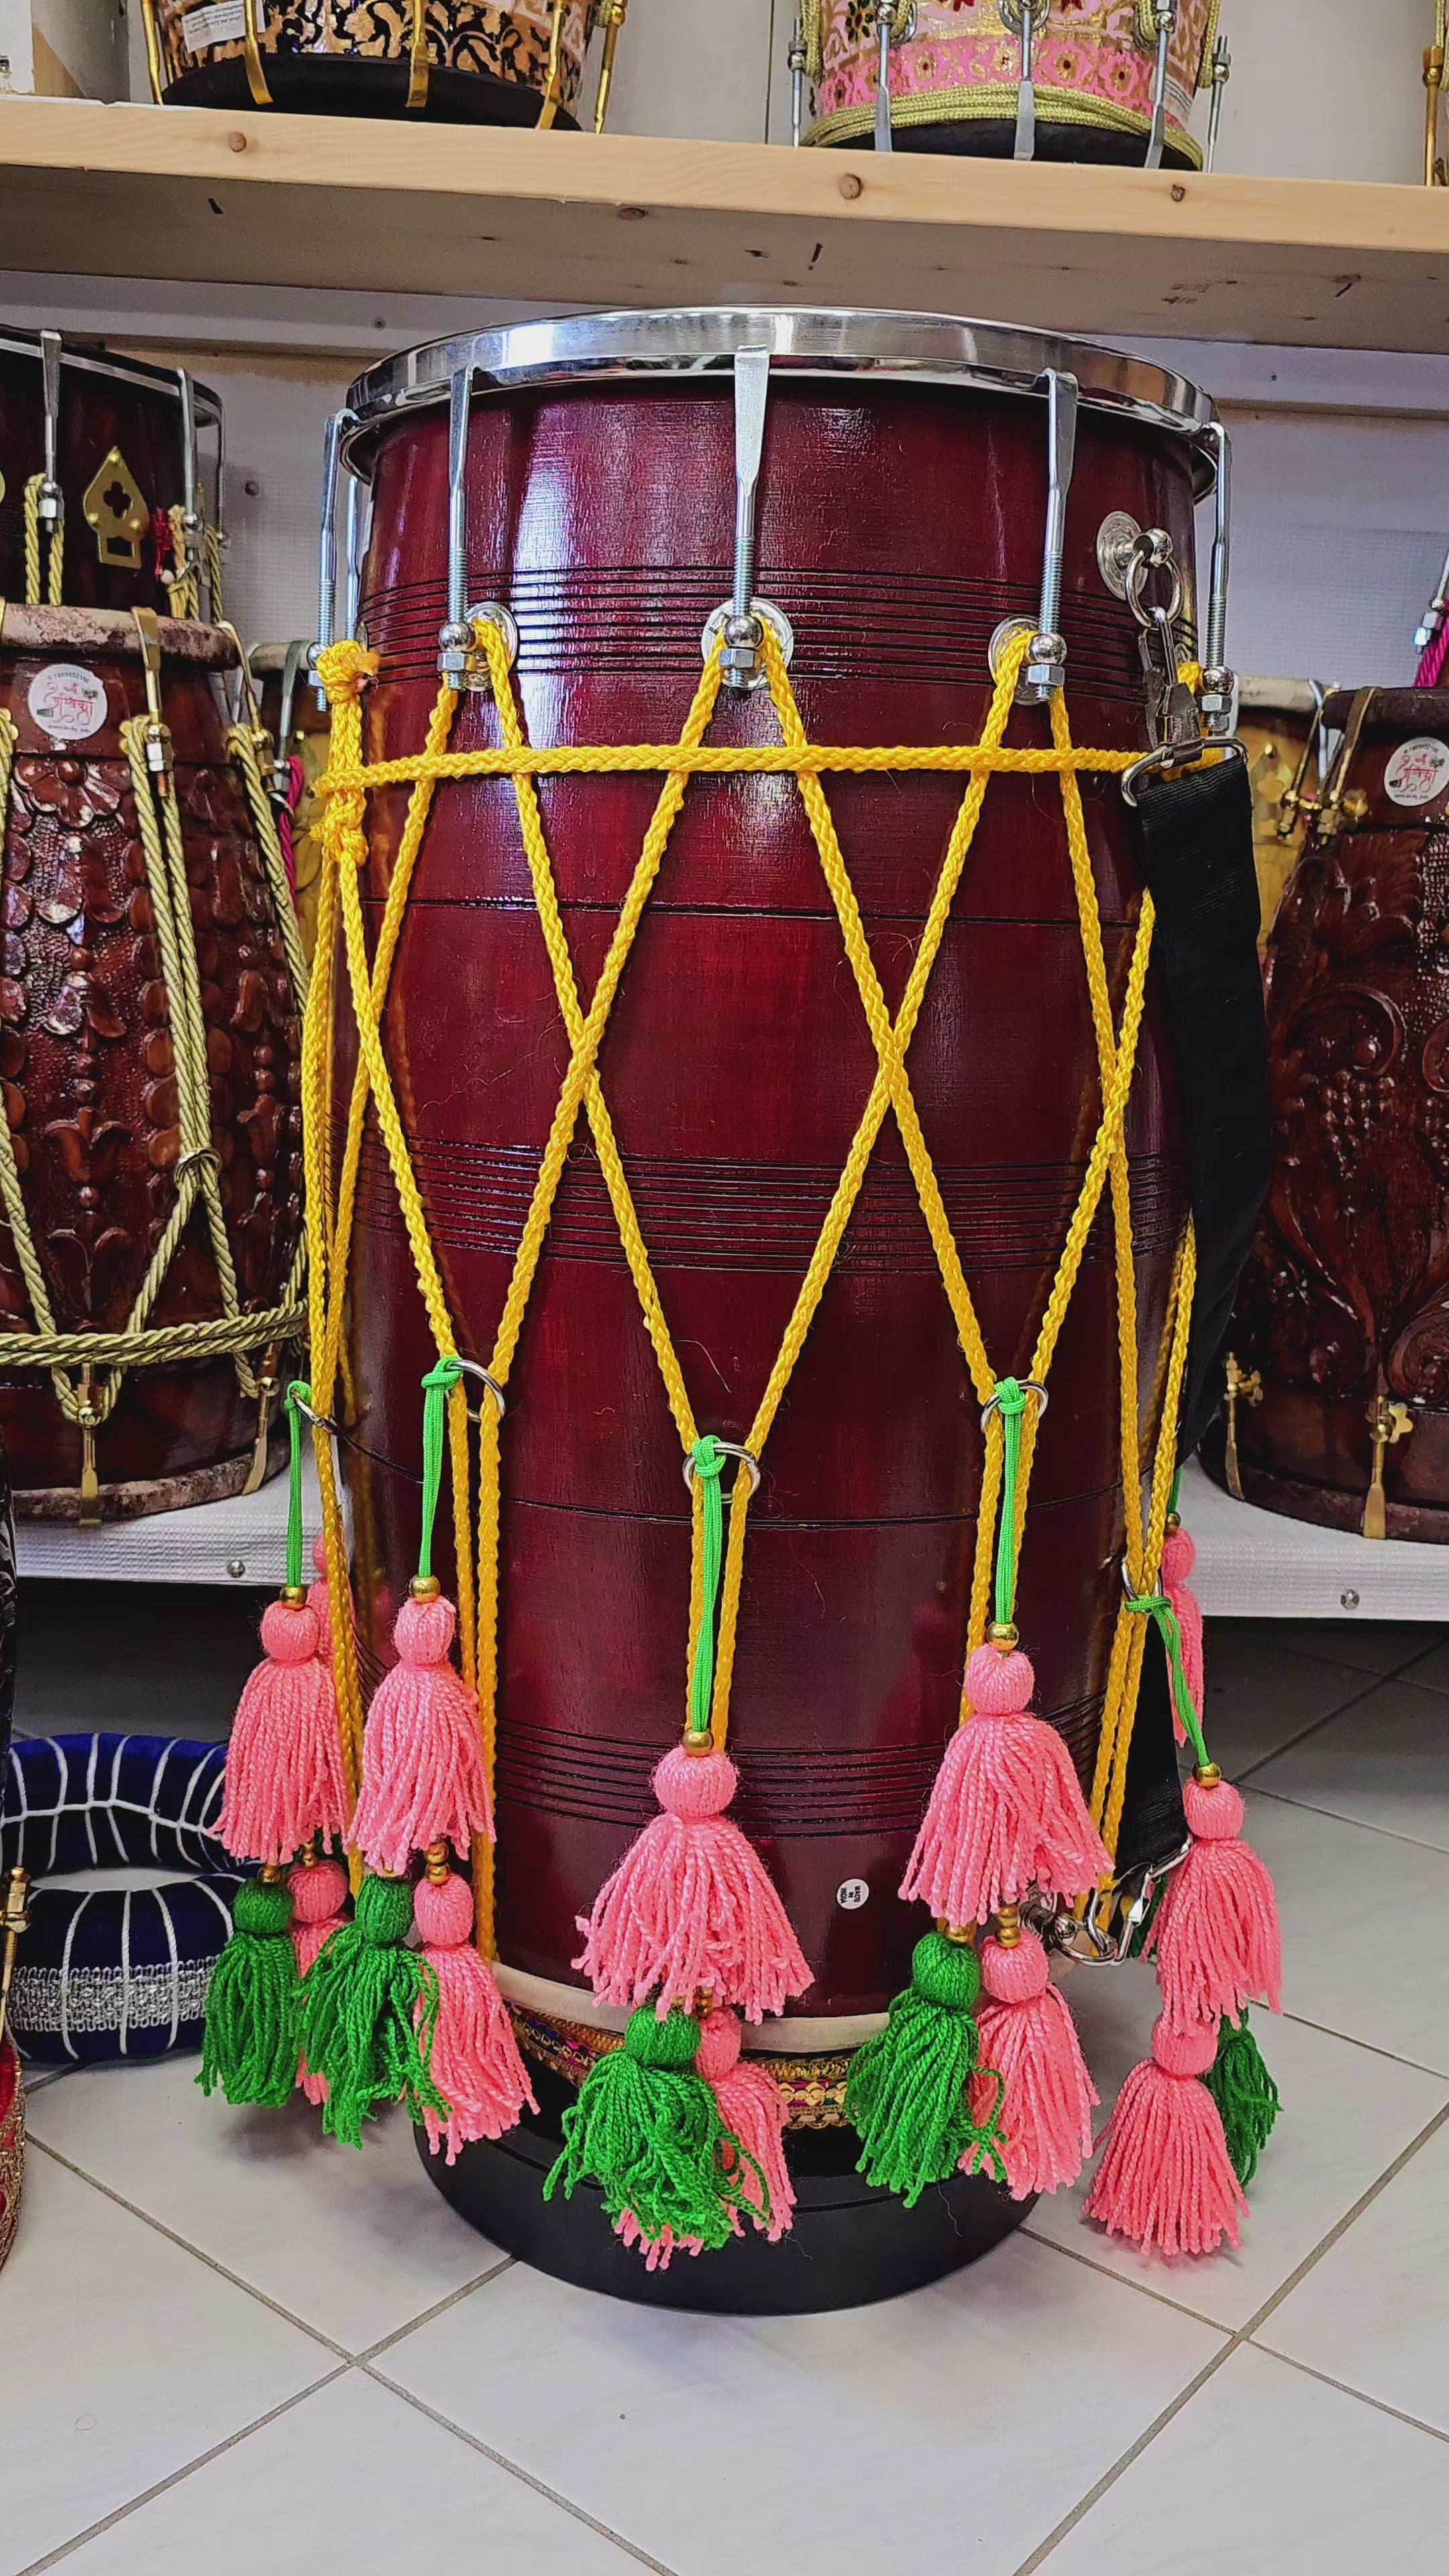 The Burgundy Fiesta Melody Dhol - A Professional Mango Wood Dhol with Yellow Ropes, Chrome Bolts, and Pink and Green Tassels!